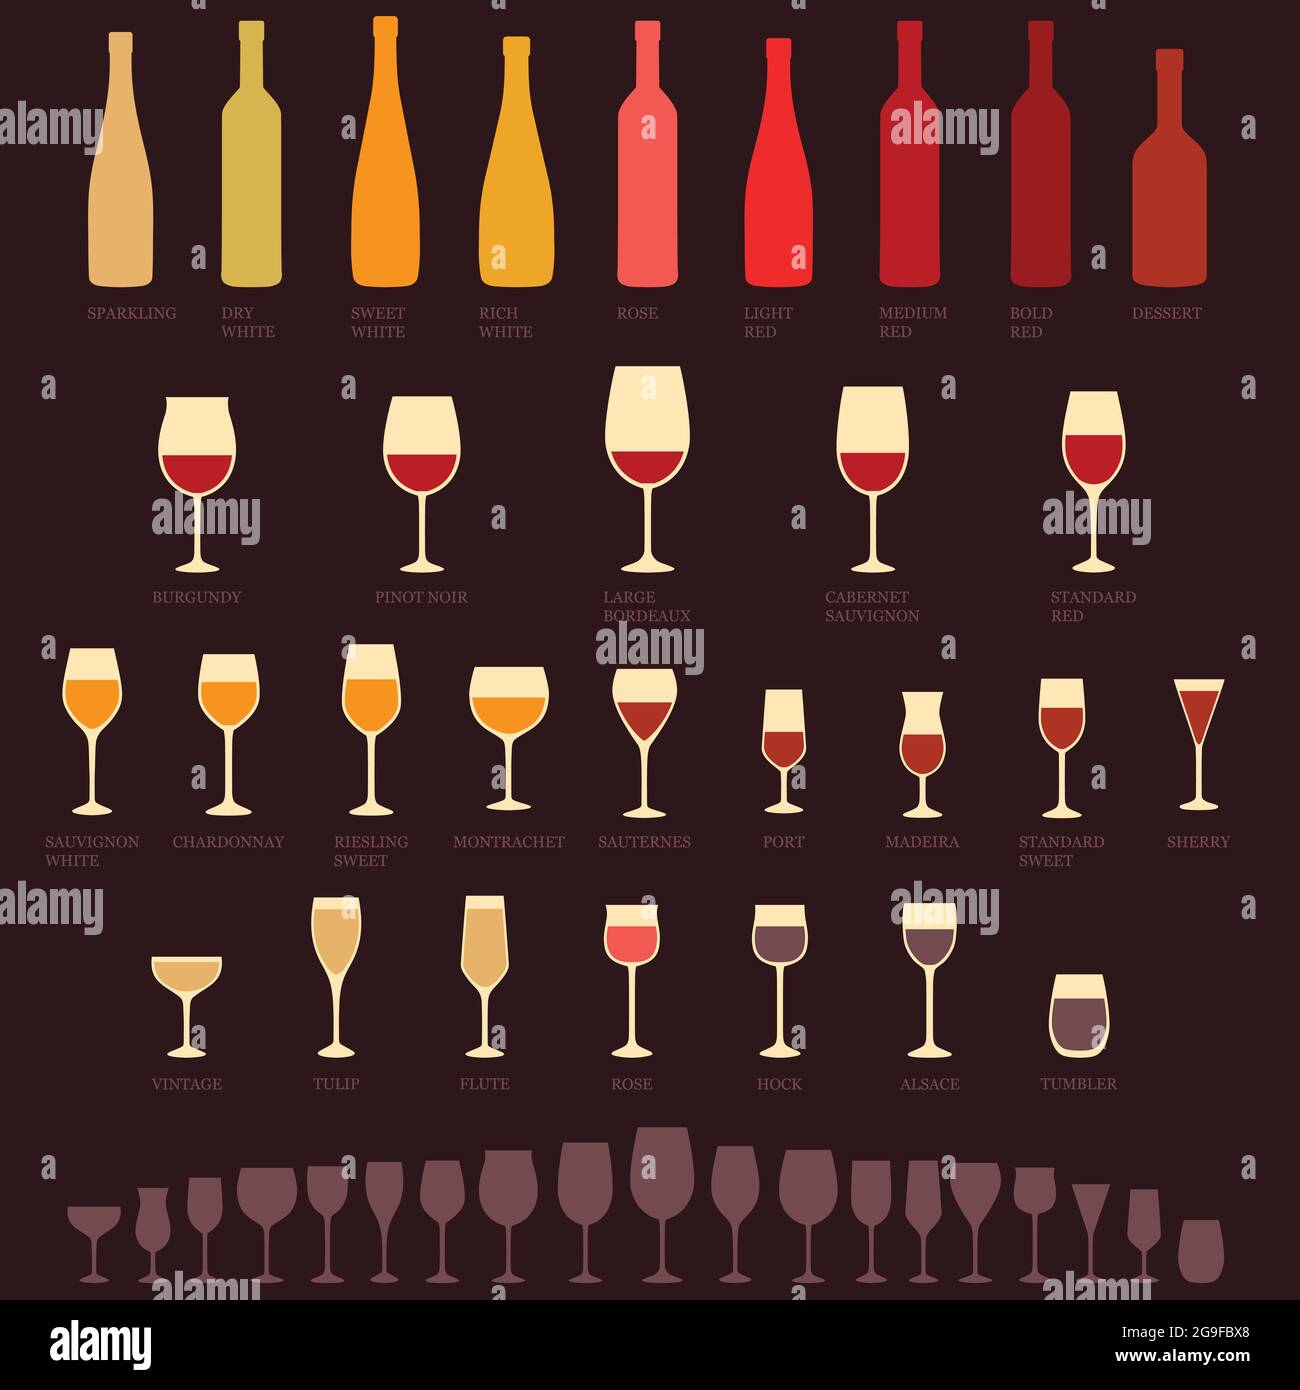 Red and white wine in bottles wineglasses Vector Image